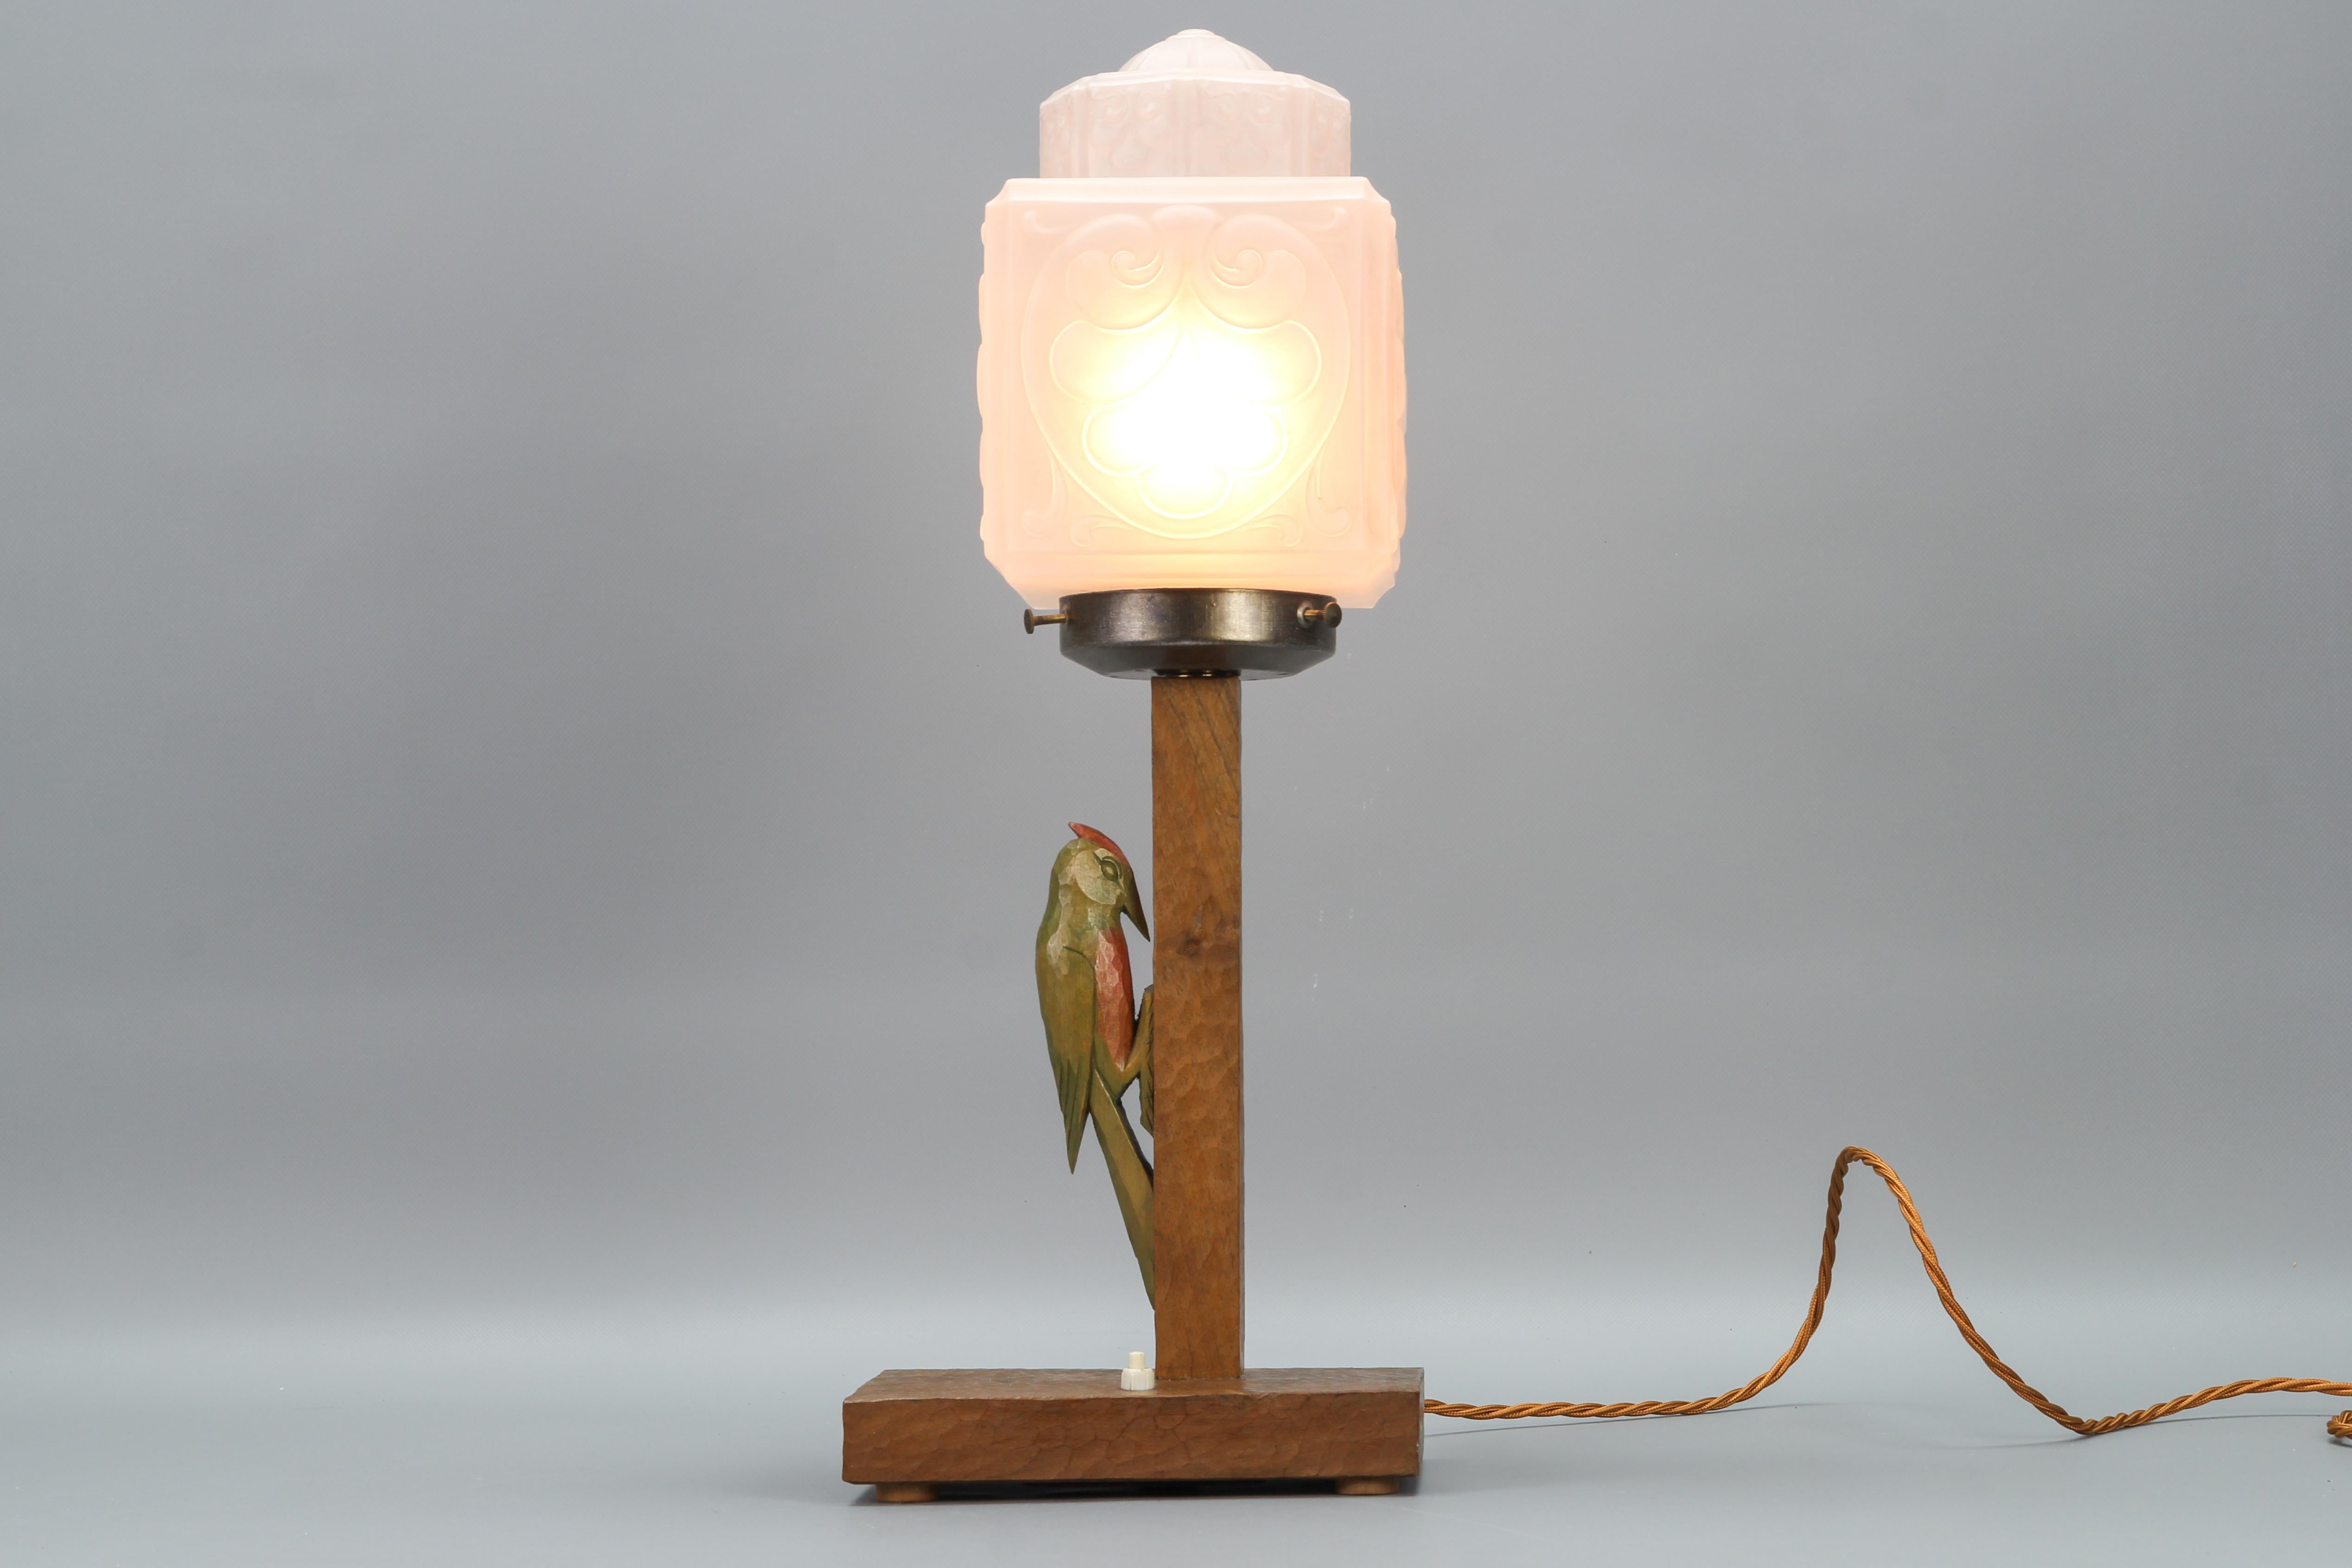 German Art Deco wooden and frosted glass table lamp with a Woodpecker from the 1930s.
This large and beautiful Art Deco period table lamp features an ornate white frosted glass lampshade and hand-carved walnut base with an adorable woodpecker figure